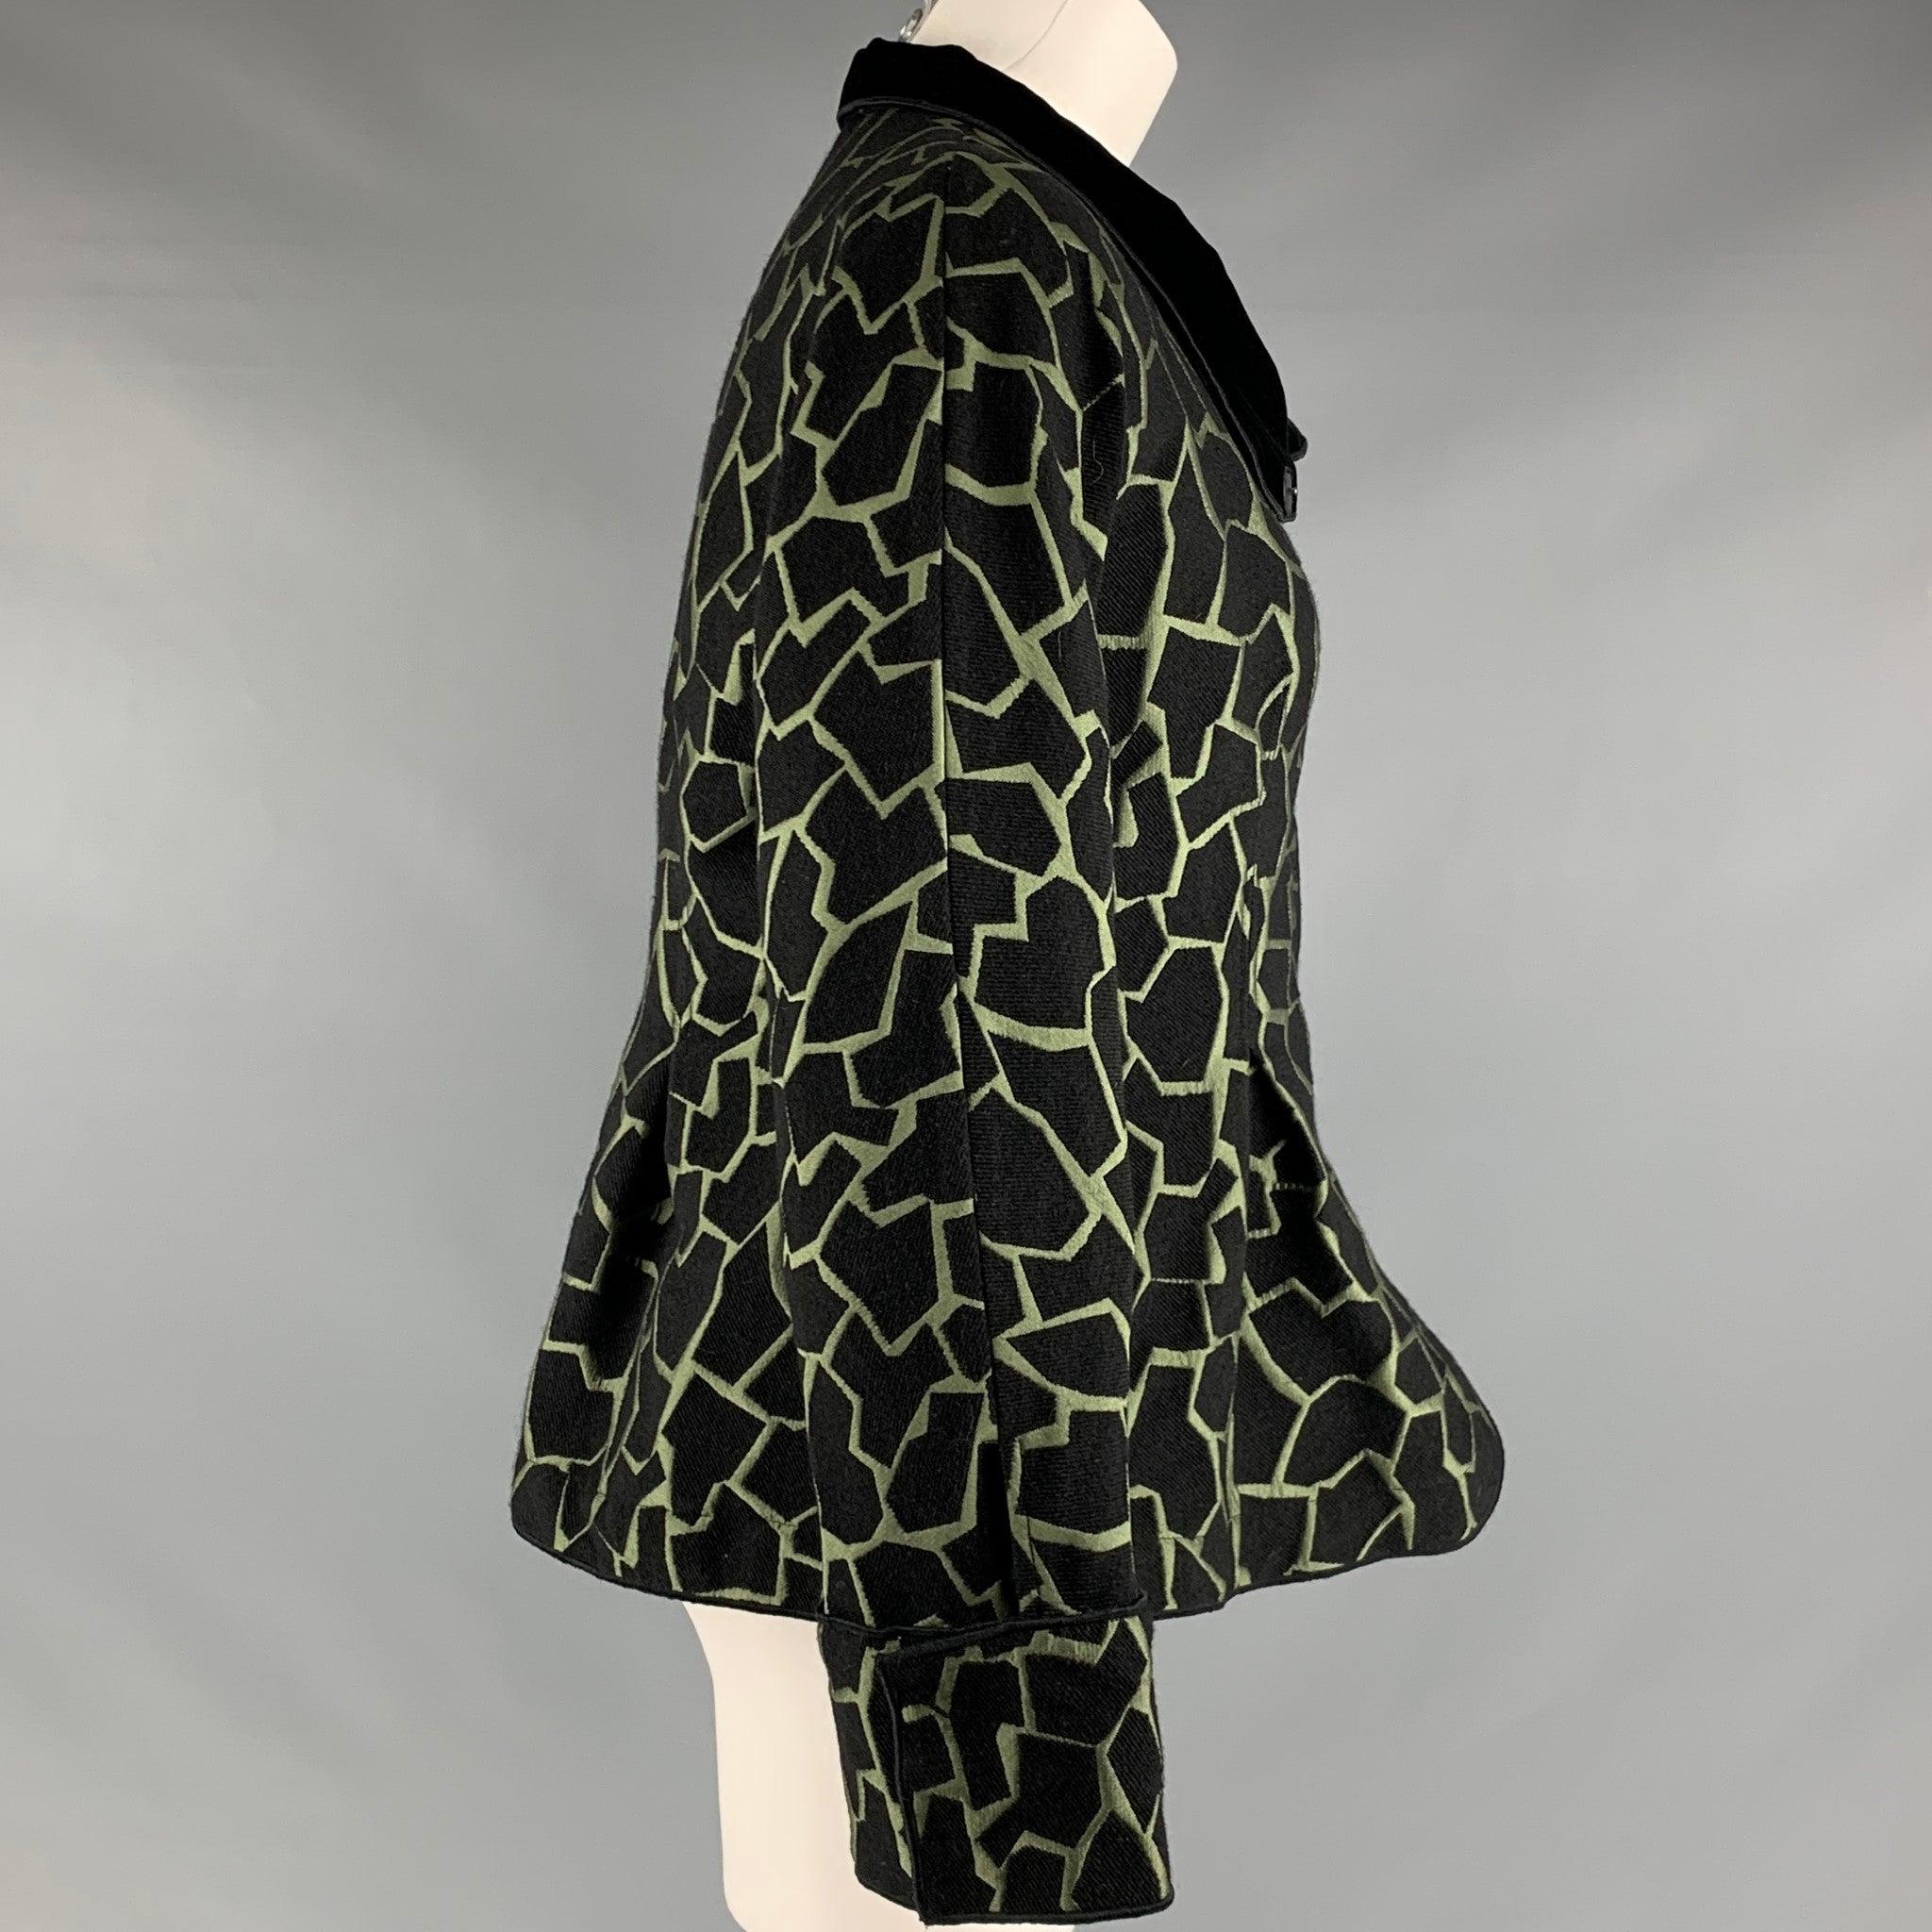 EMPORIO ARMANI blazer comes in black and green acrylic blend jacquard featuring black velvet detail at collar, two pockets at front, a shawl lapel, and snap button closure. Very Good Pre-Owned Condition. Minor signs of wear. 

Marked:   44